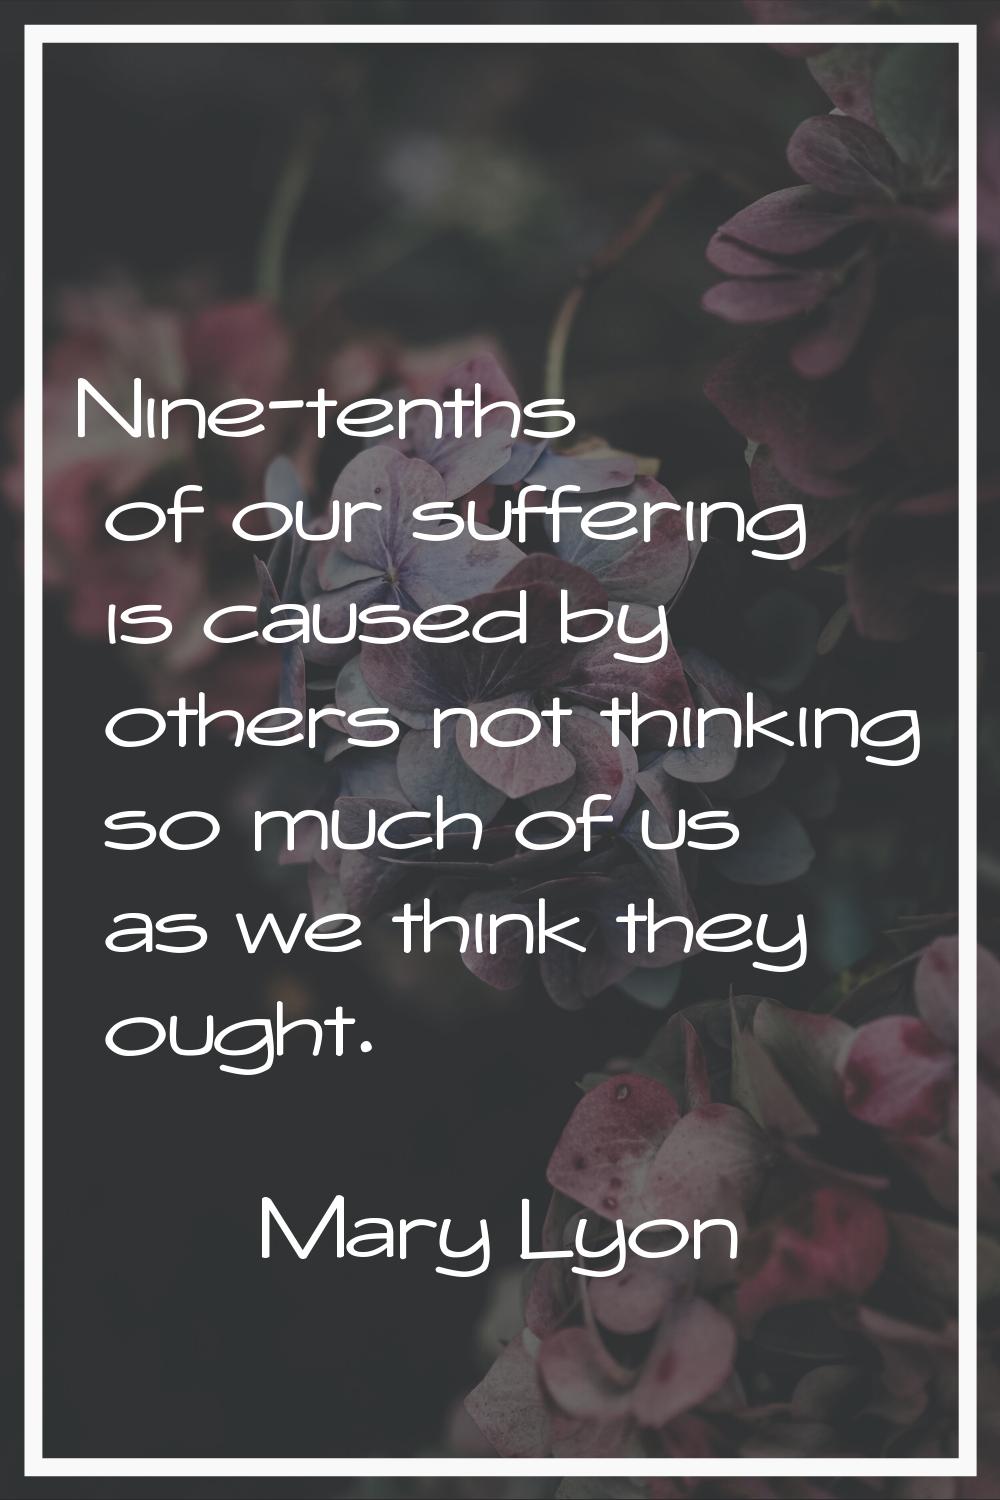 Nine-tenths of our suffering is caused by others not thinking so much of us as we think they ought.